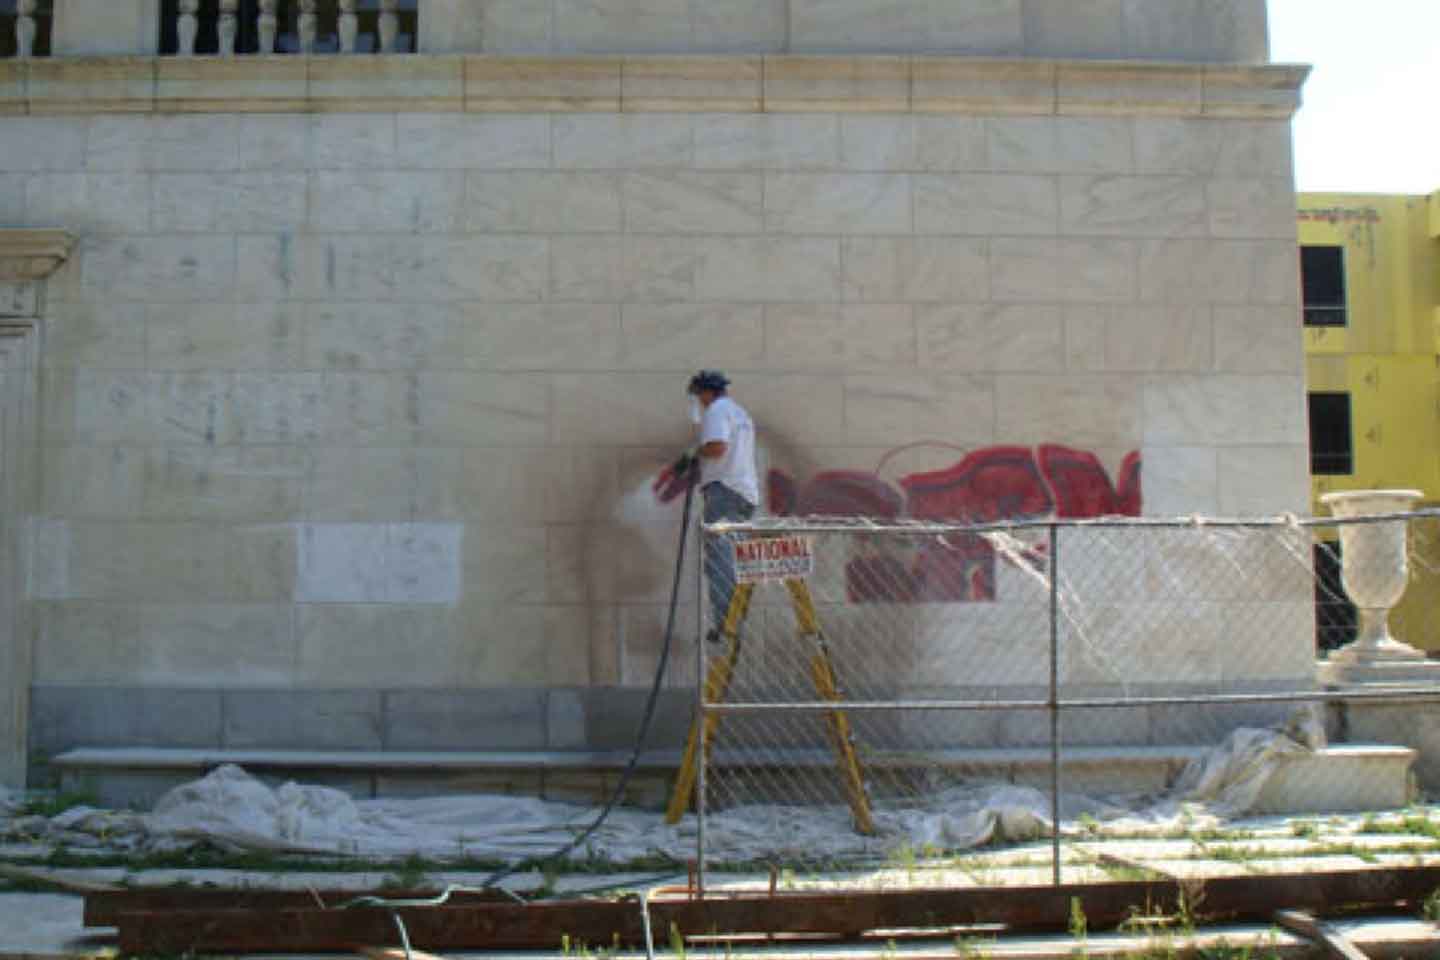 Vail Mansion Historical Building - Cleaning/Graffiti Removal Using Farrow System